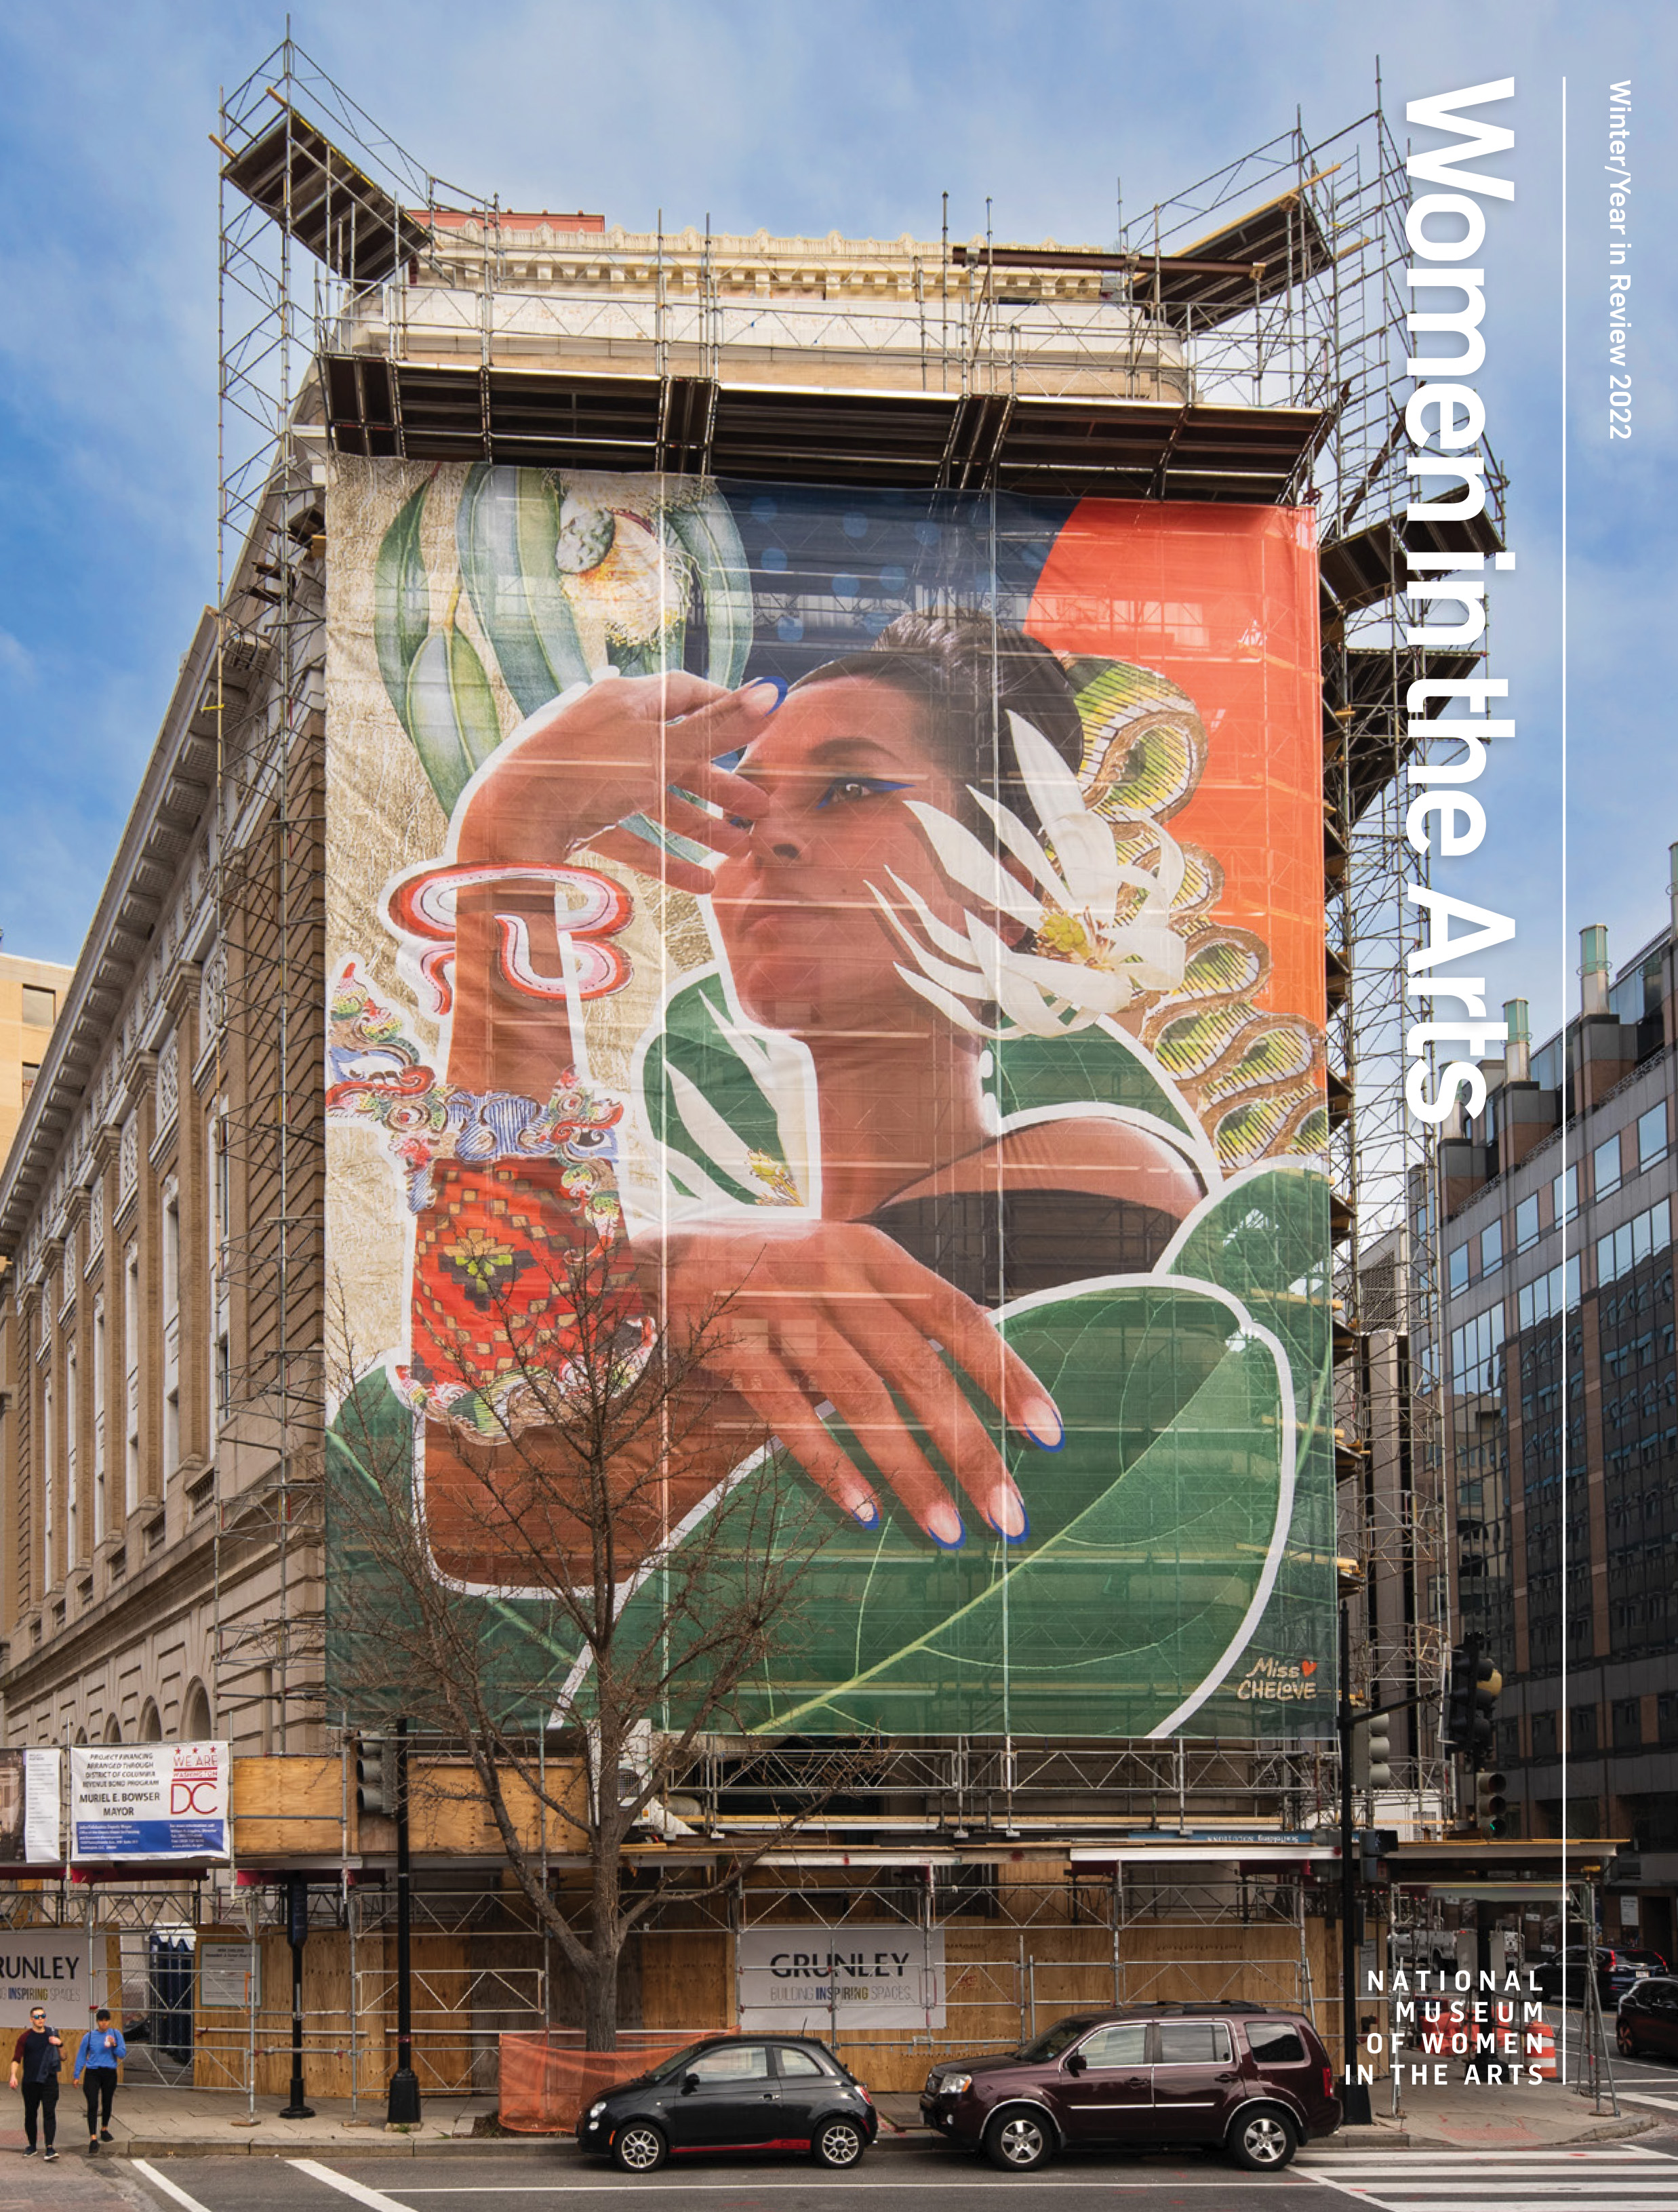 Magazine cover features the exterior view of the museum with scoffolding all around that features a large, colorful mural on the front depicting a dark-skinned woman gazing into the distance with her arm touching her face.